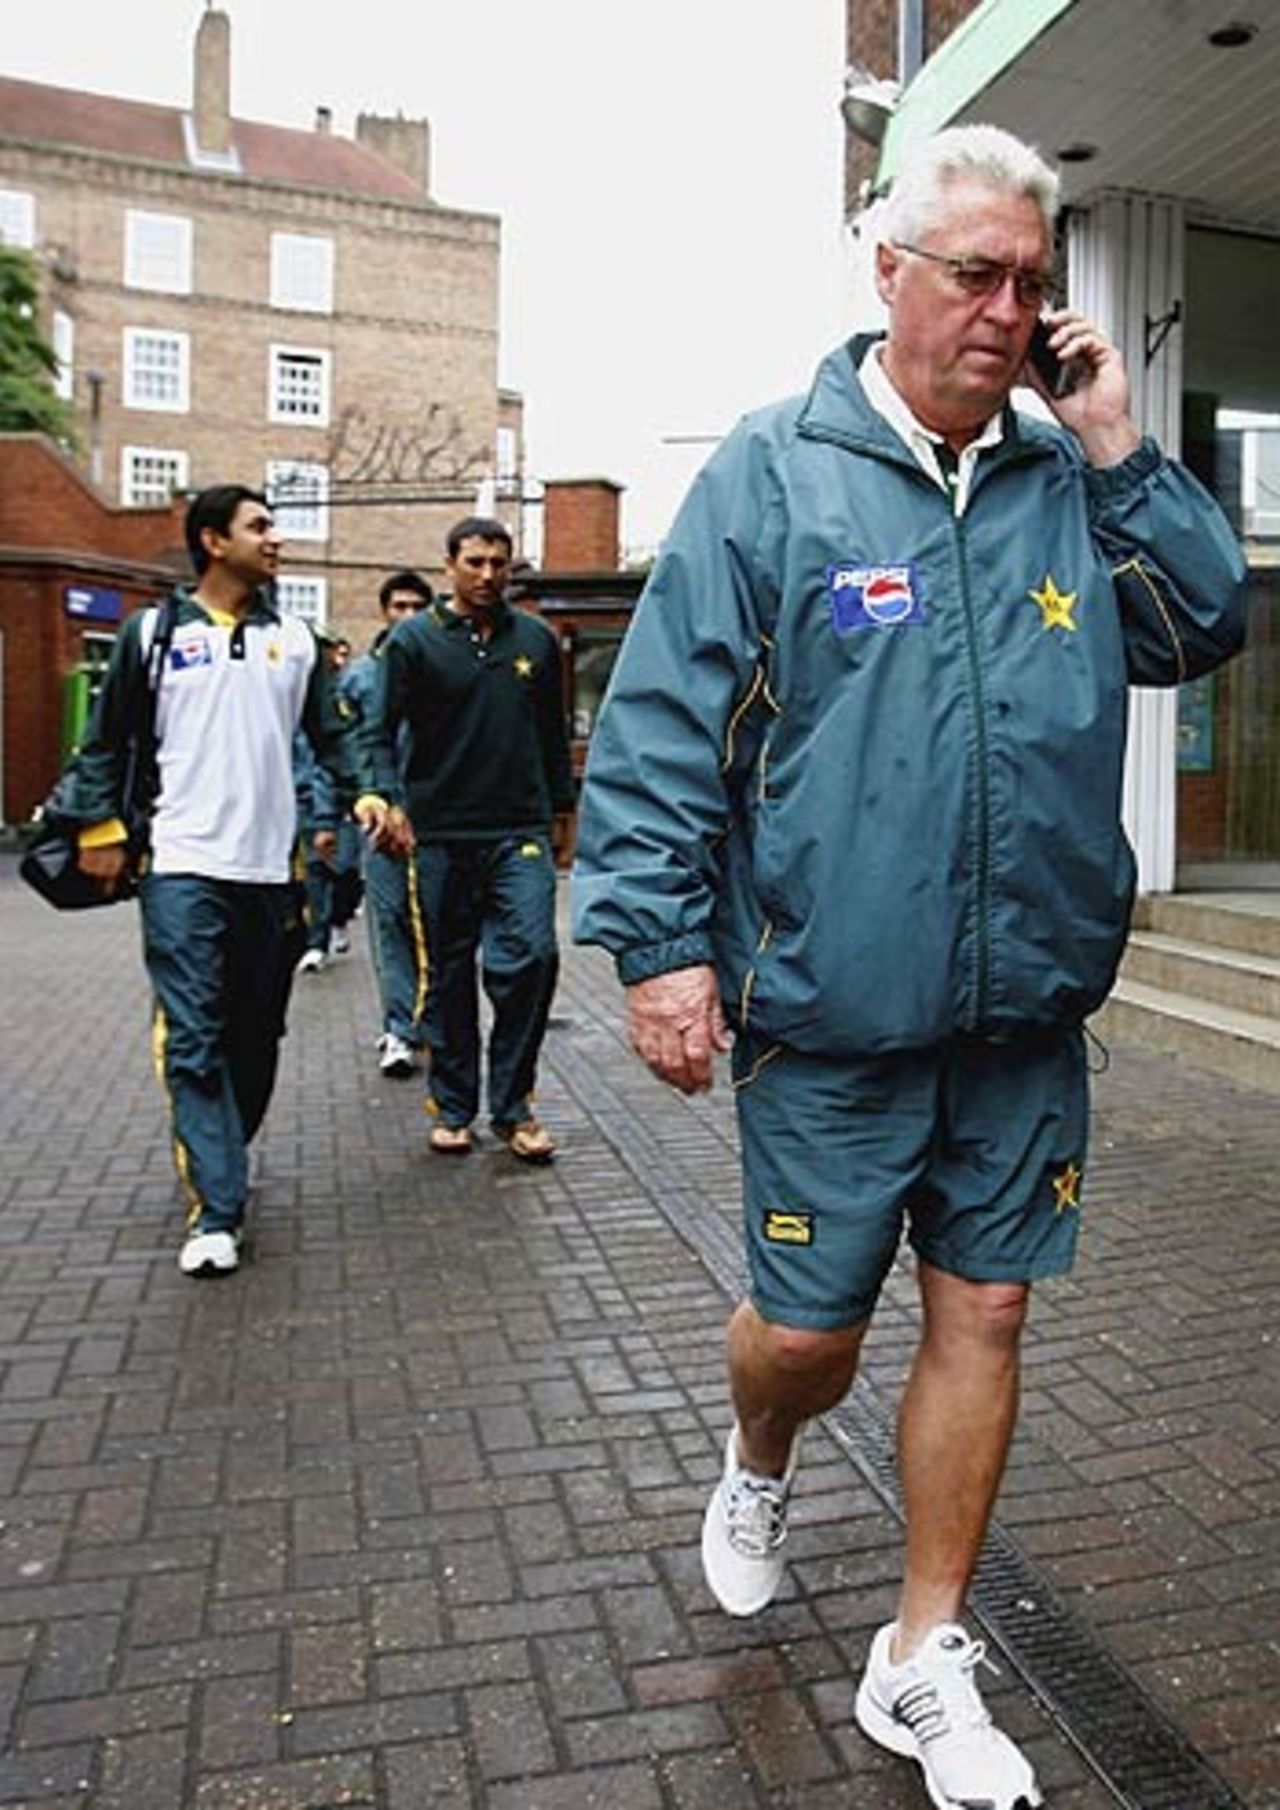 Bob Woolmer leads his players into The Oval, England v Pakistan, 4th Test, The Oval, August 21, 2006